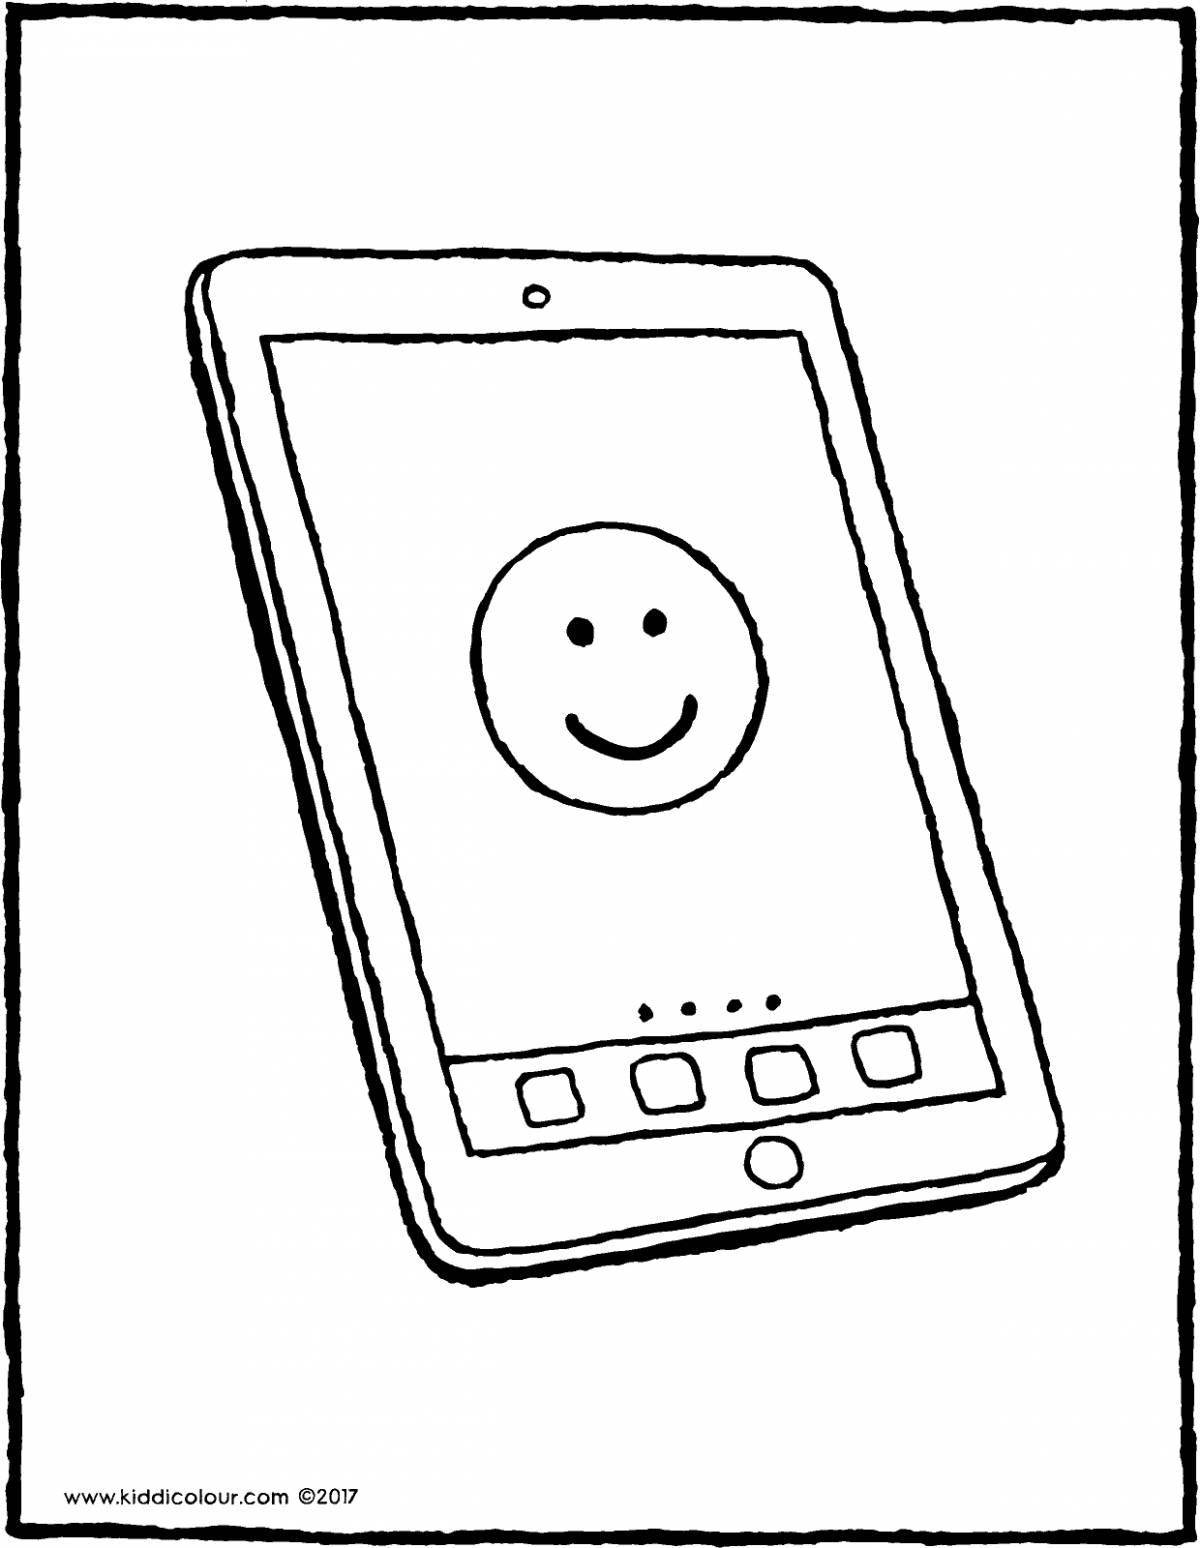 Coloring pages unusual phones and tablets